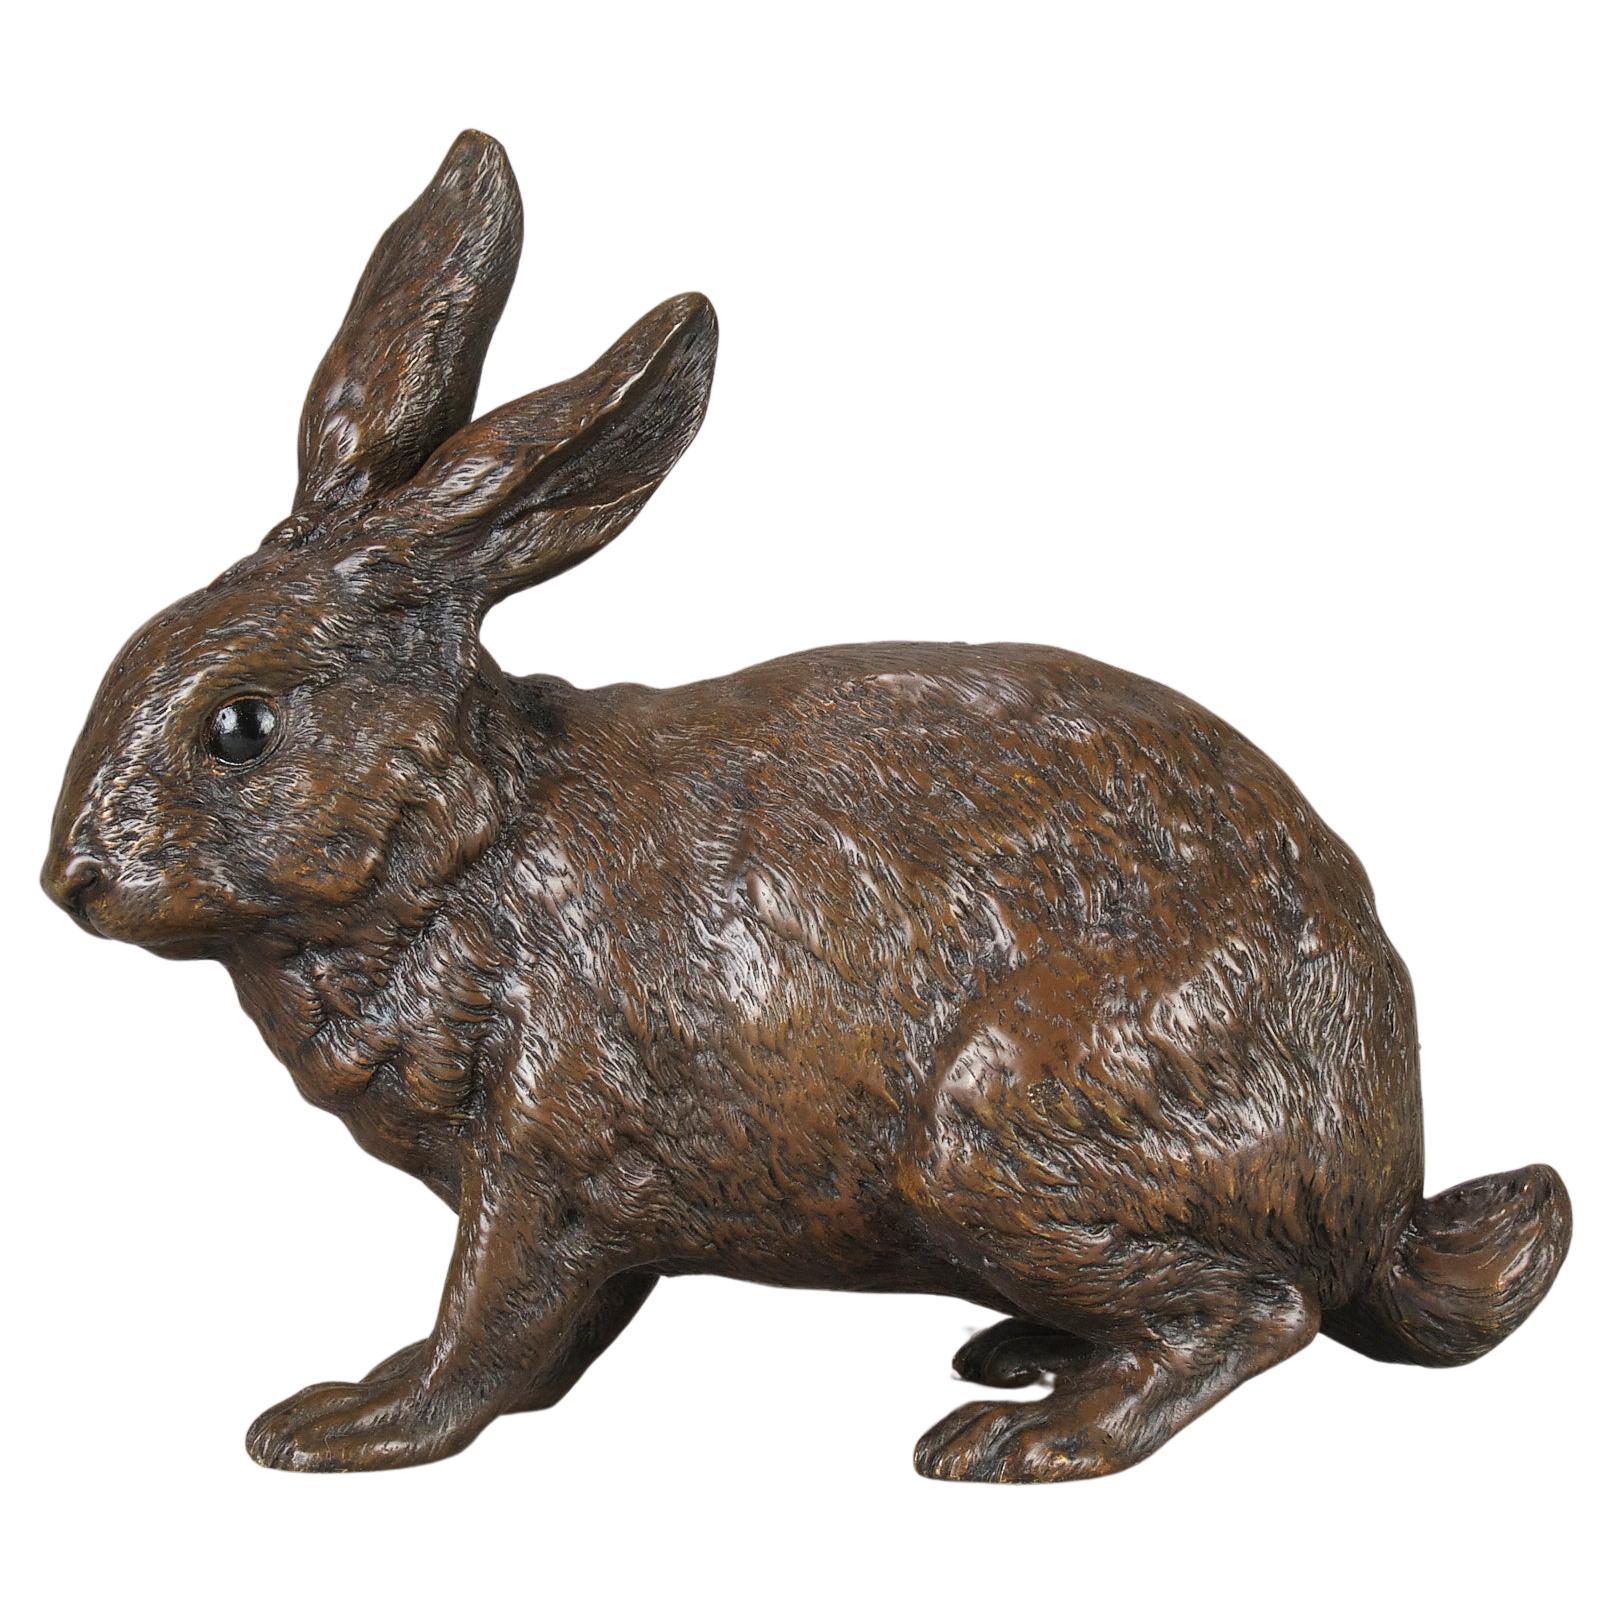 Early 20th Century Cold-Painted Bronze "Rabbit" by Franz Bergman